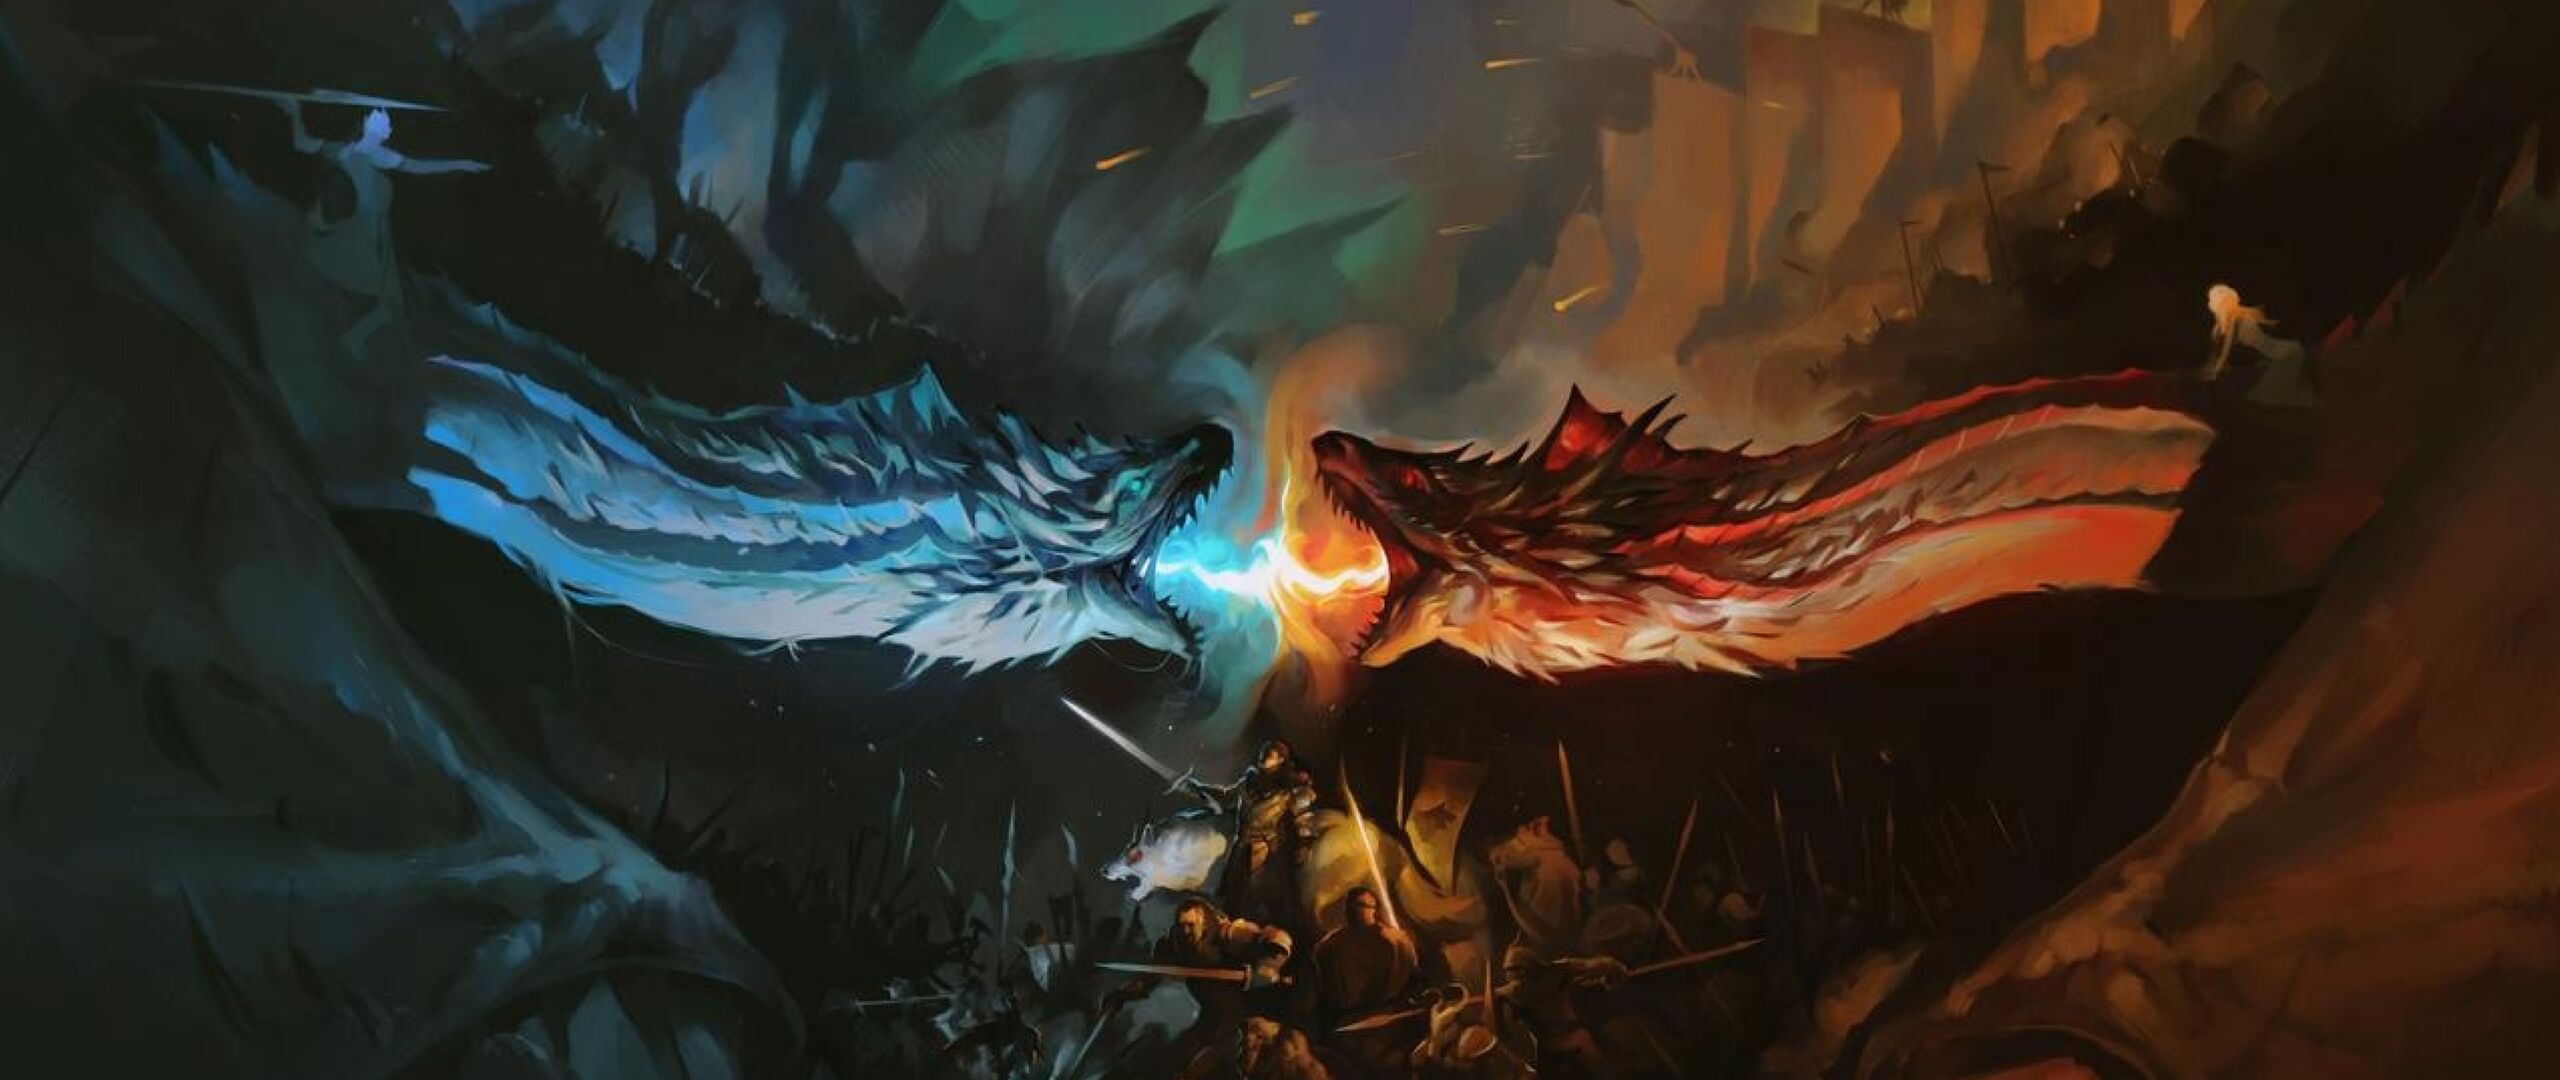 Ice Fire Dragon Game Of Thrones 8k 2560x1080 Resolution HD 4k Wallpaper, Image, Background, Photo and Picture